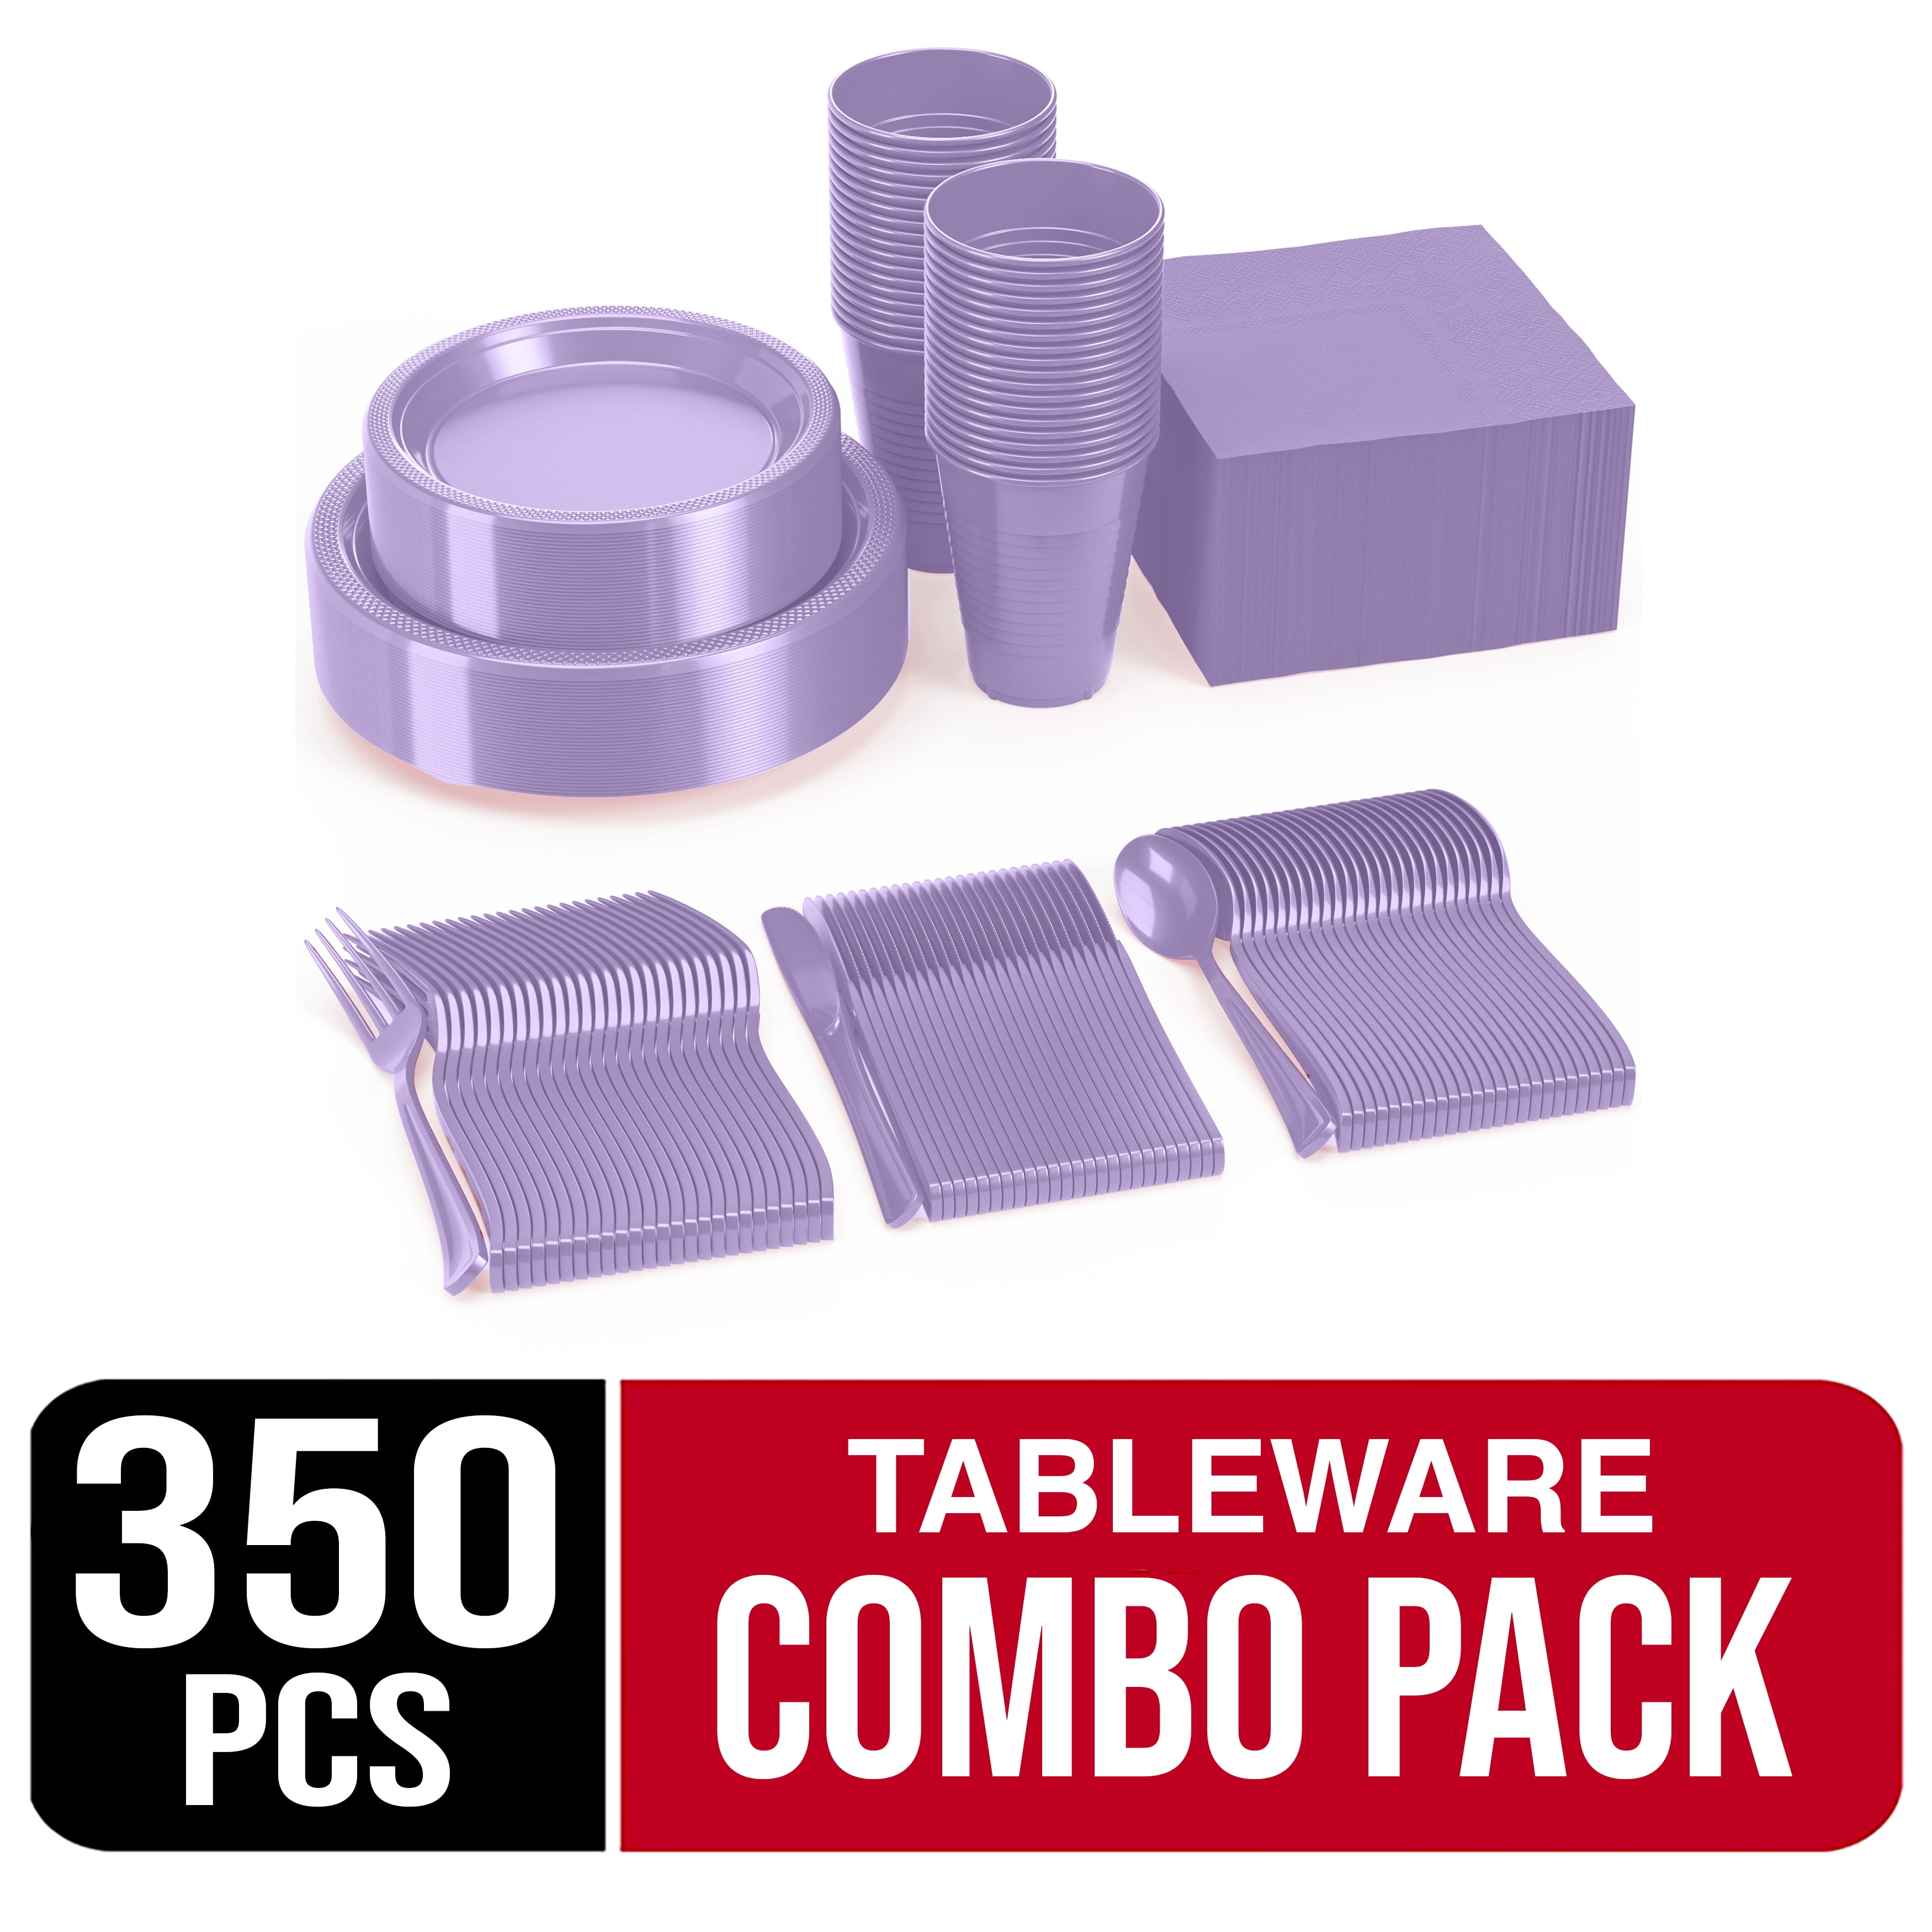 Pokémon Party Supplies Pack Serves 16: 7 Plates and Beverage Napkins with  Birthday Candles (Bundle for16)